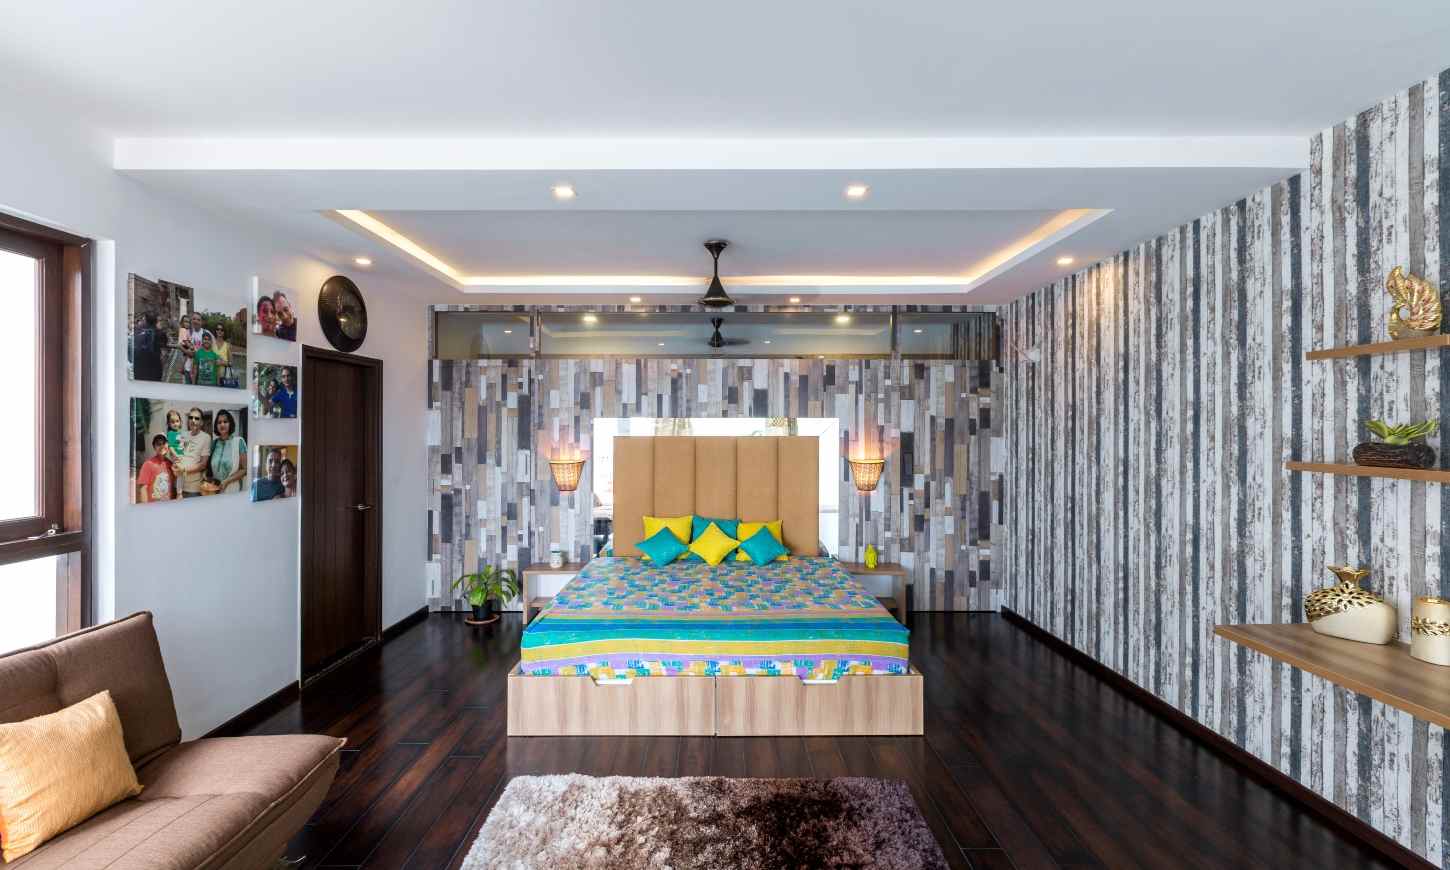 Low budget interior designers in bangalore with a bedroom with bold patterns